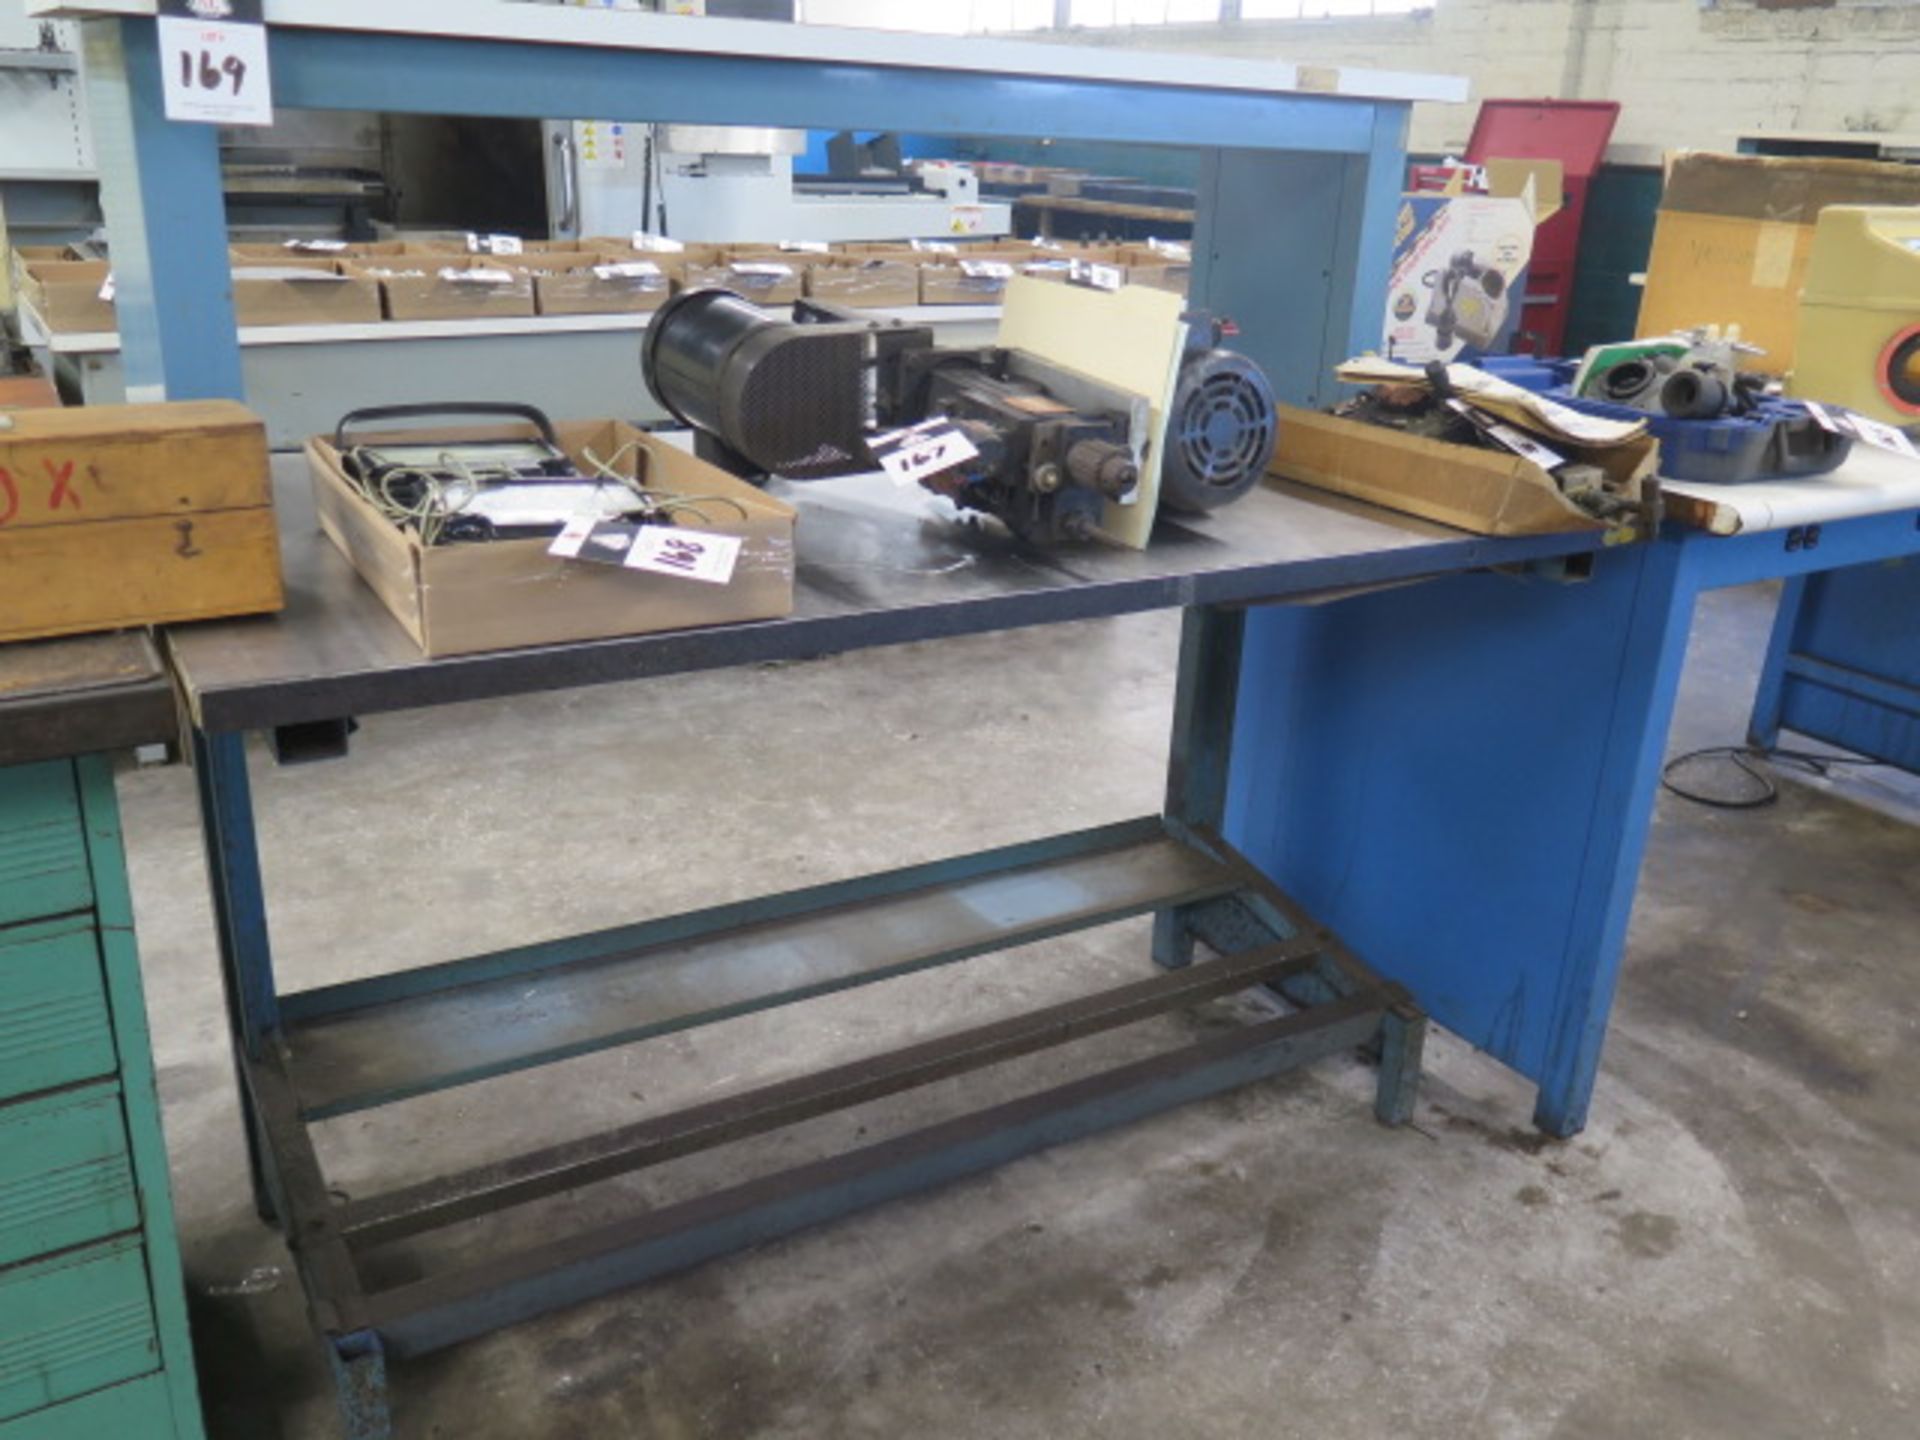 Work Benches (2) (SOLD AS-IS - NO WARRANTY)